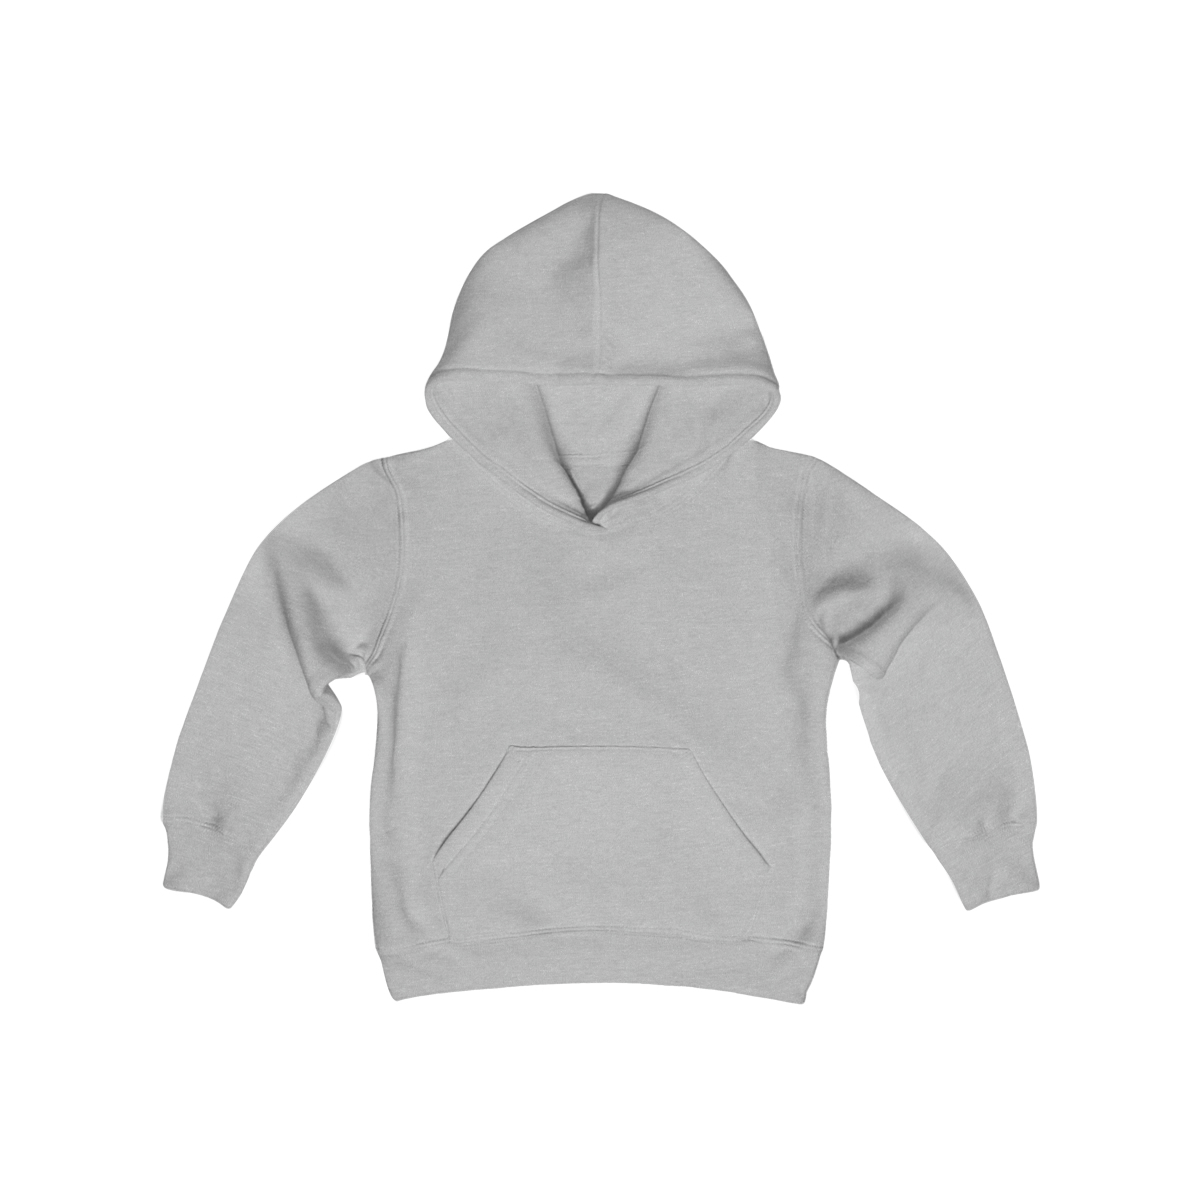 CHAMPION Kids Hoodie - Champions Club Special Needs Ministry